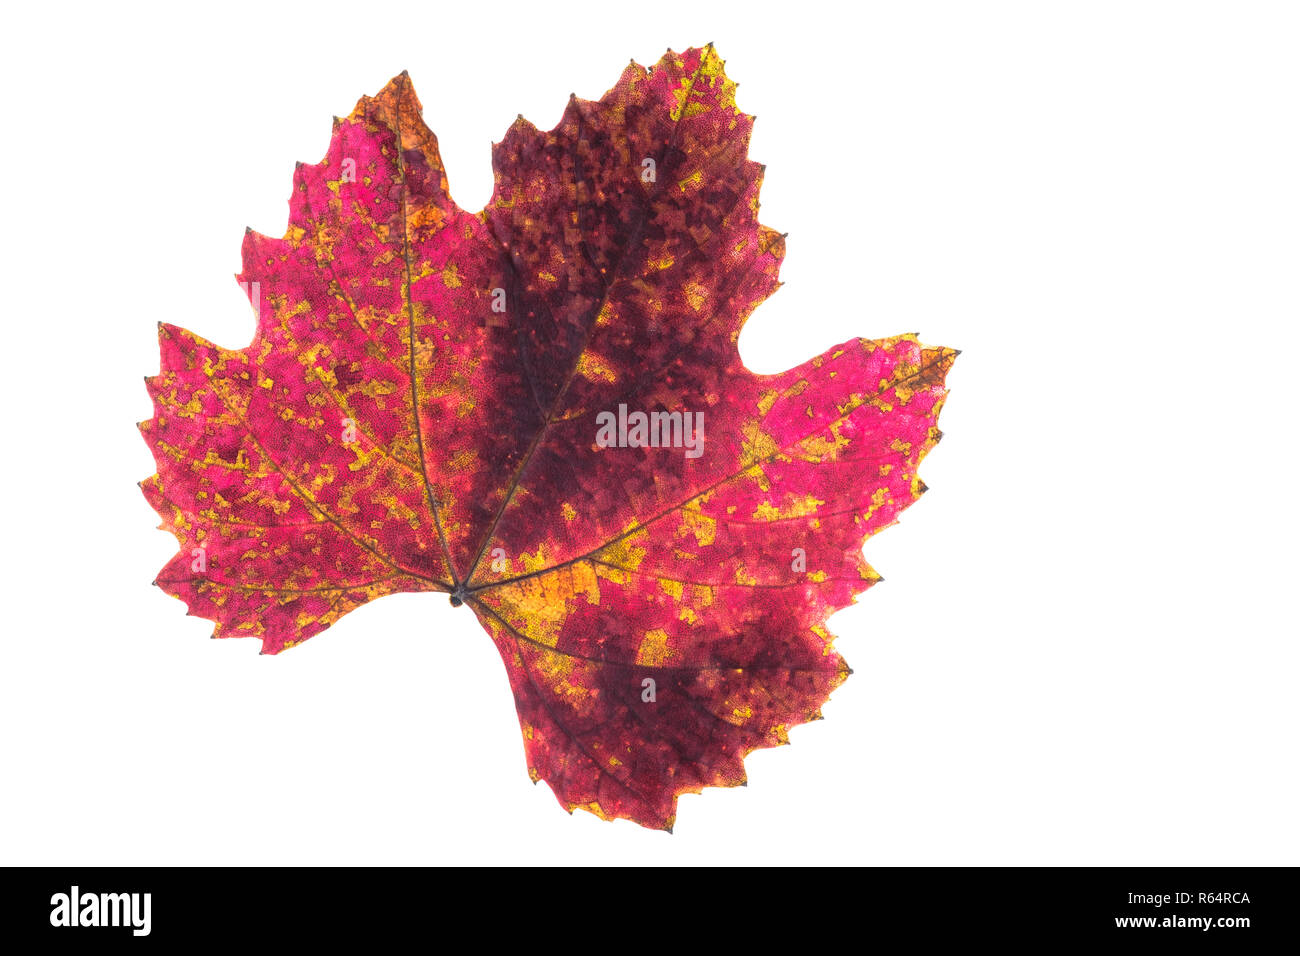 spots red yellow brown on vine leaf in autumn coloration Stock Photo